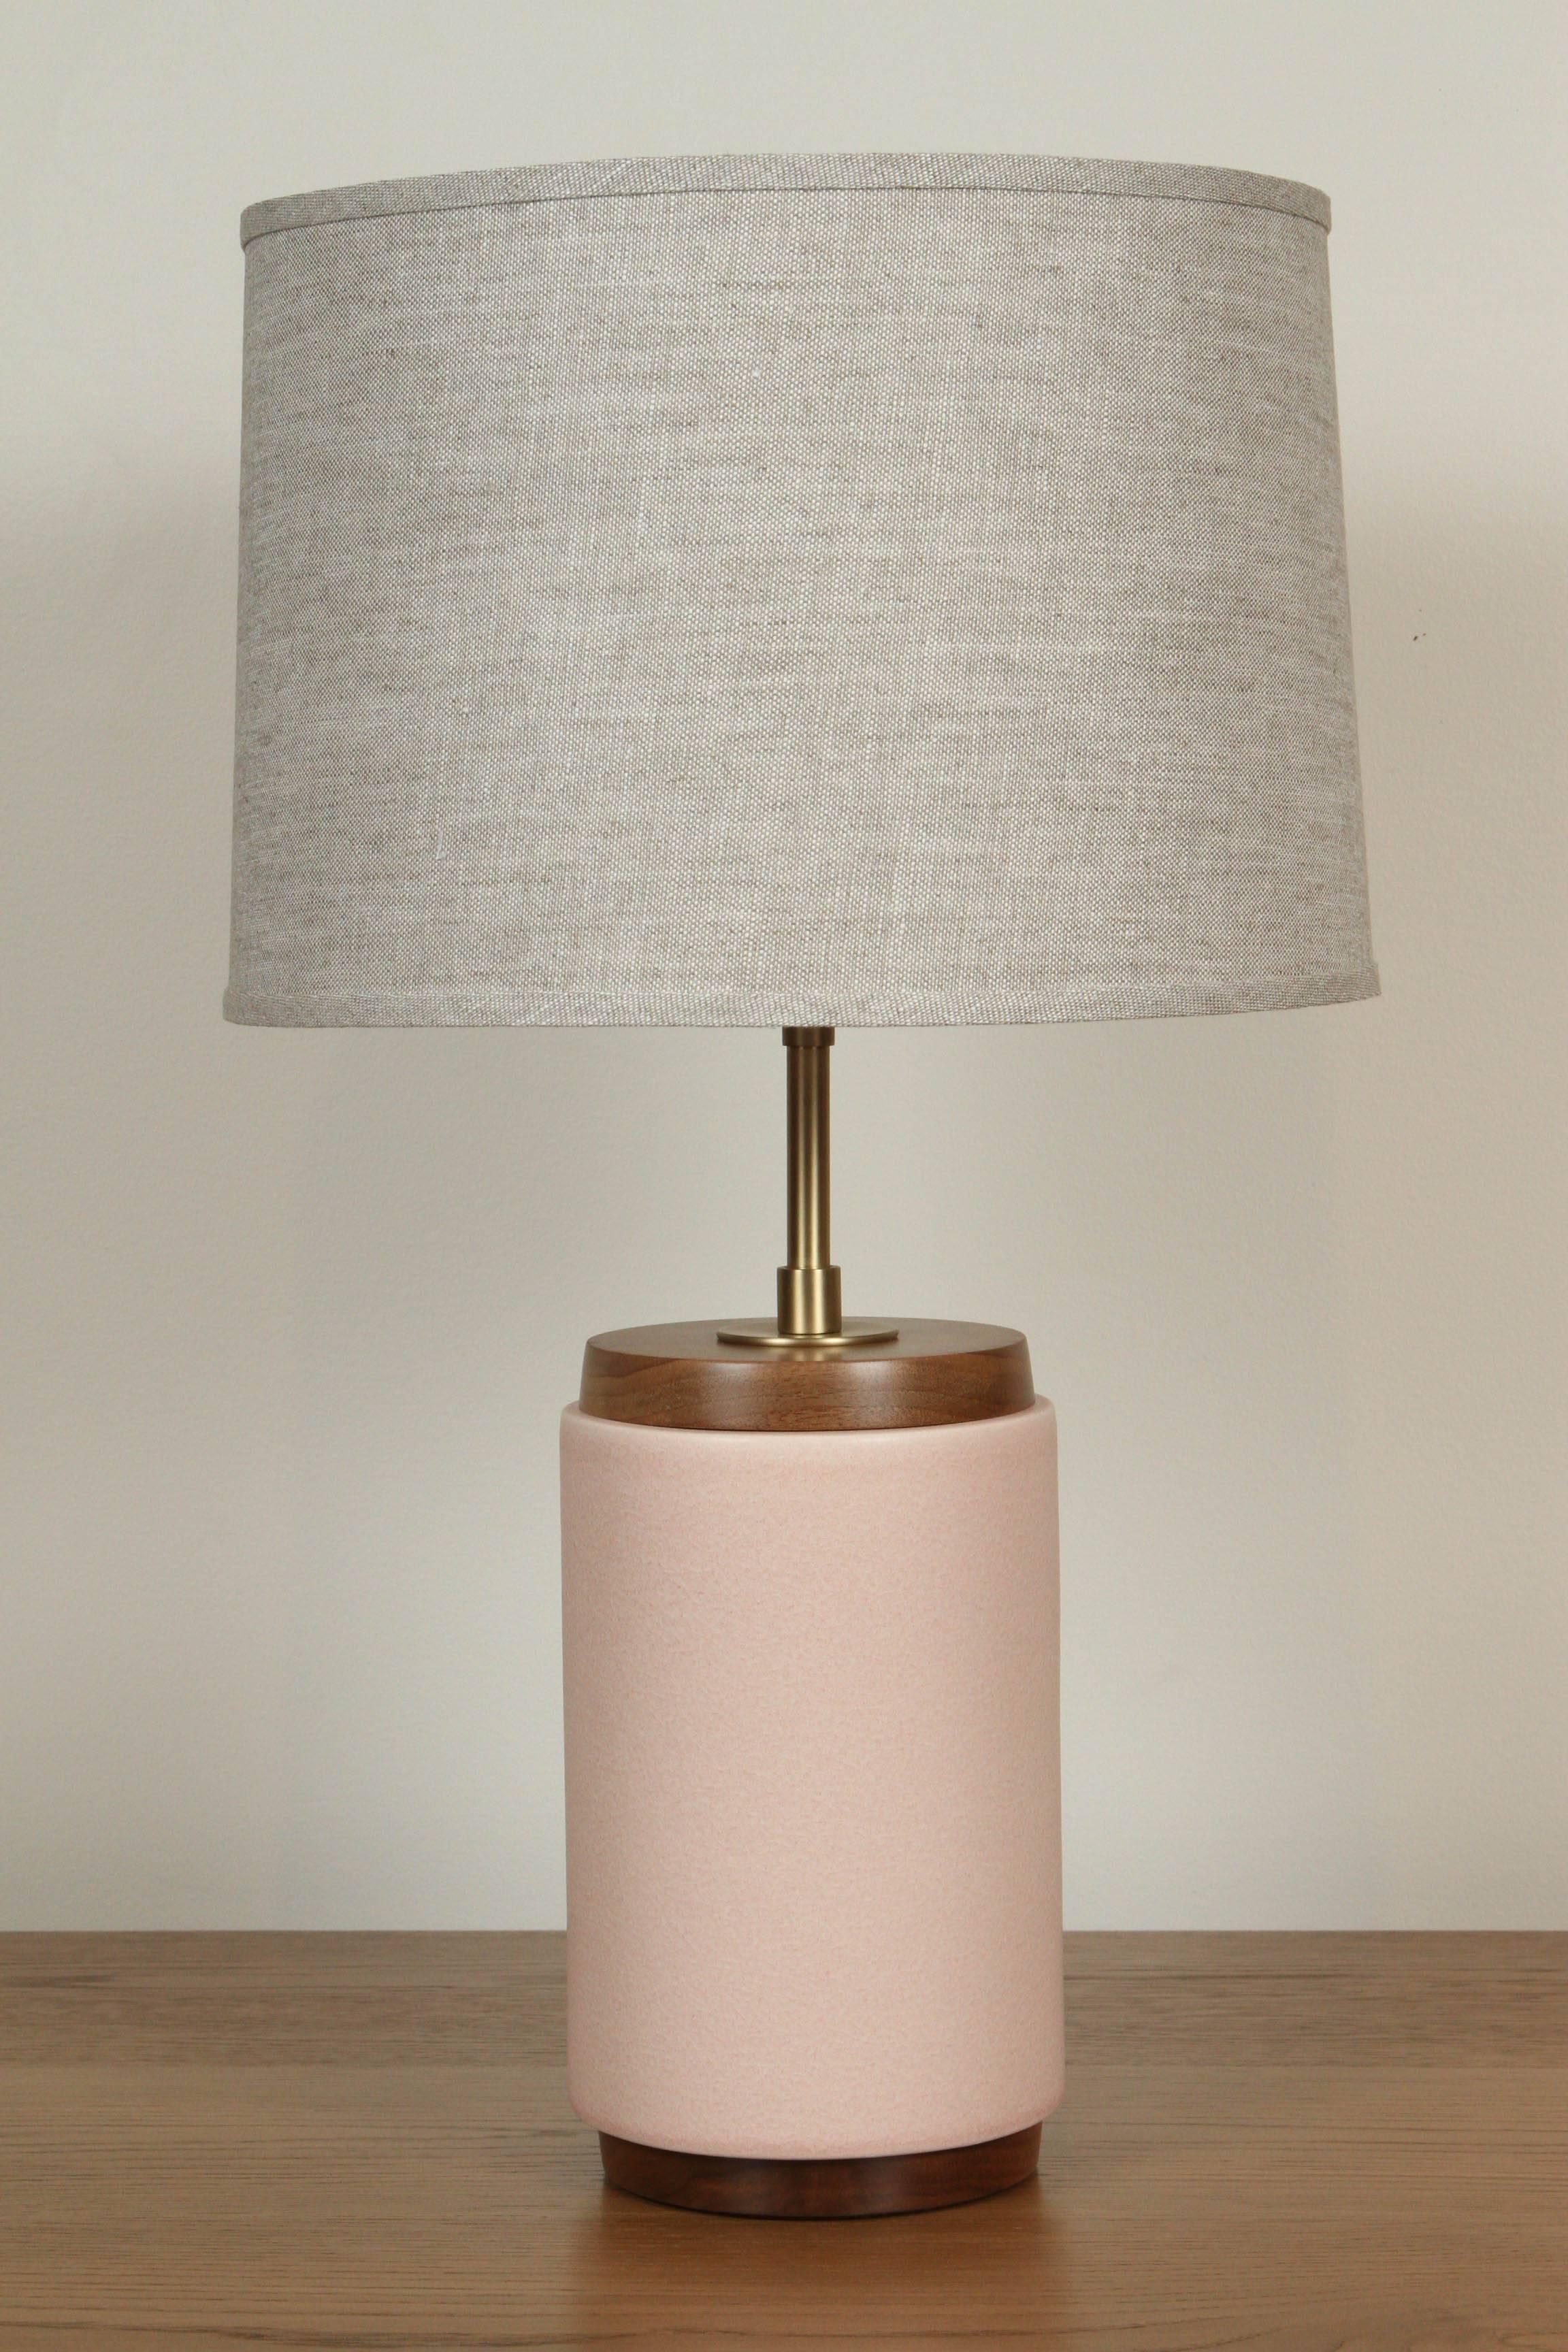 Porter lamp by Stone and Sawyer.